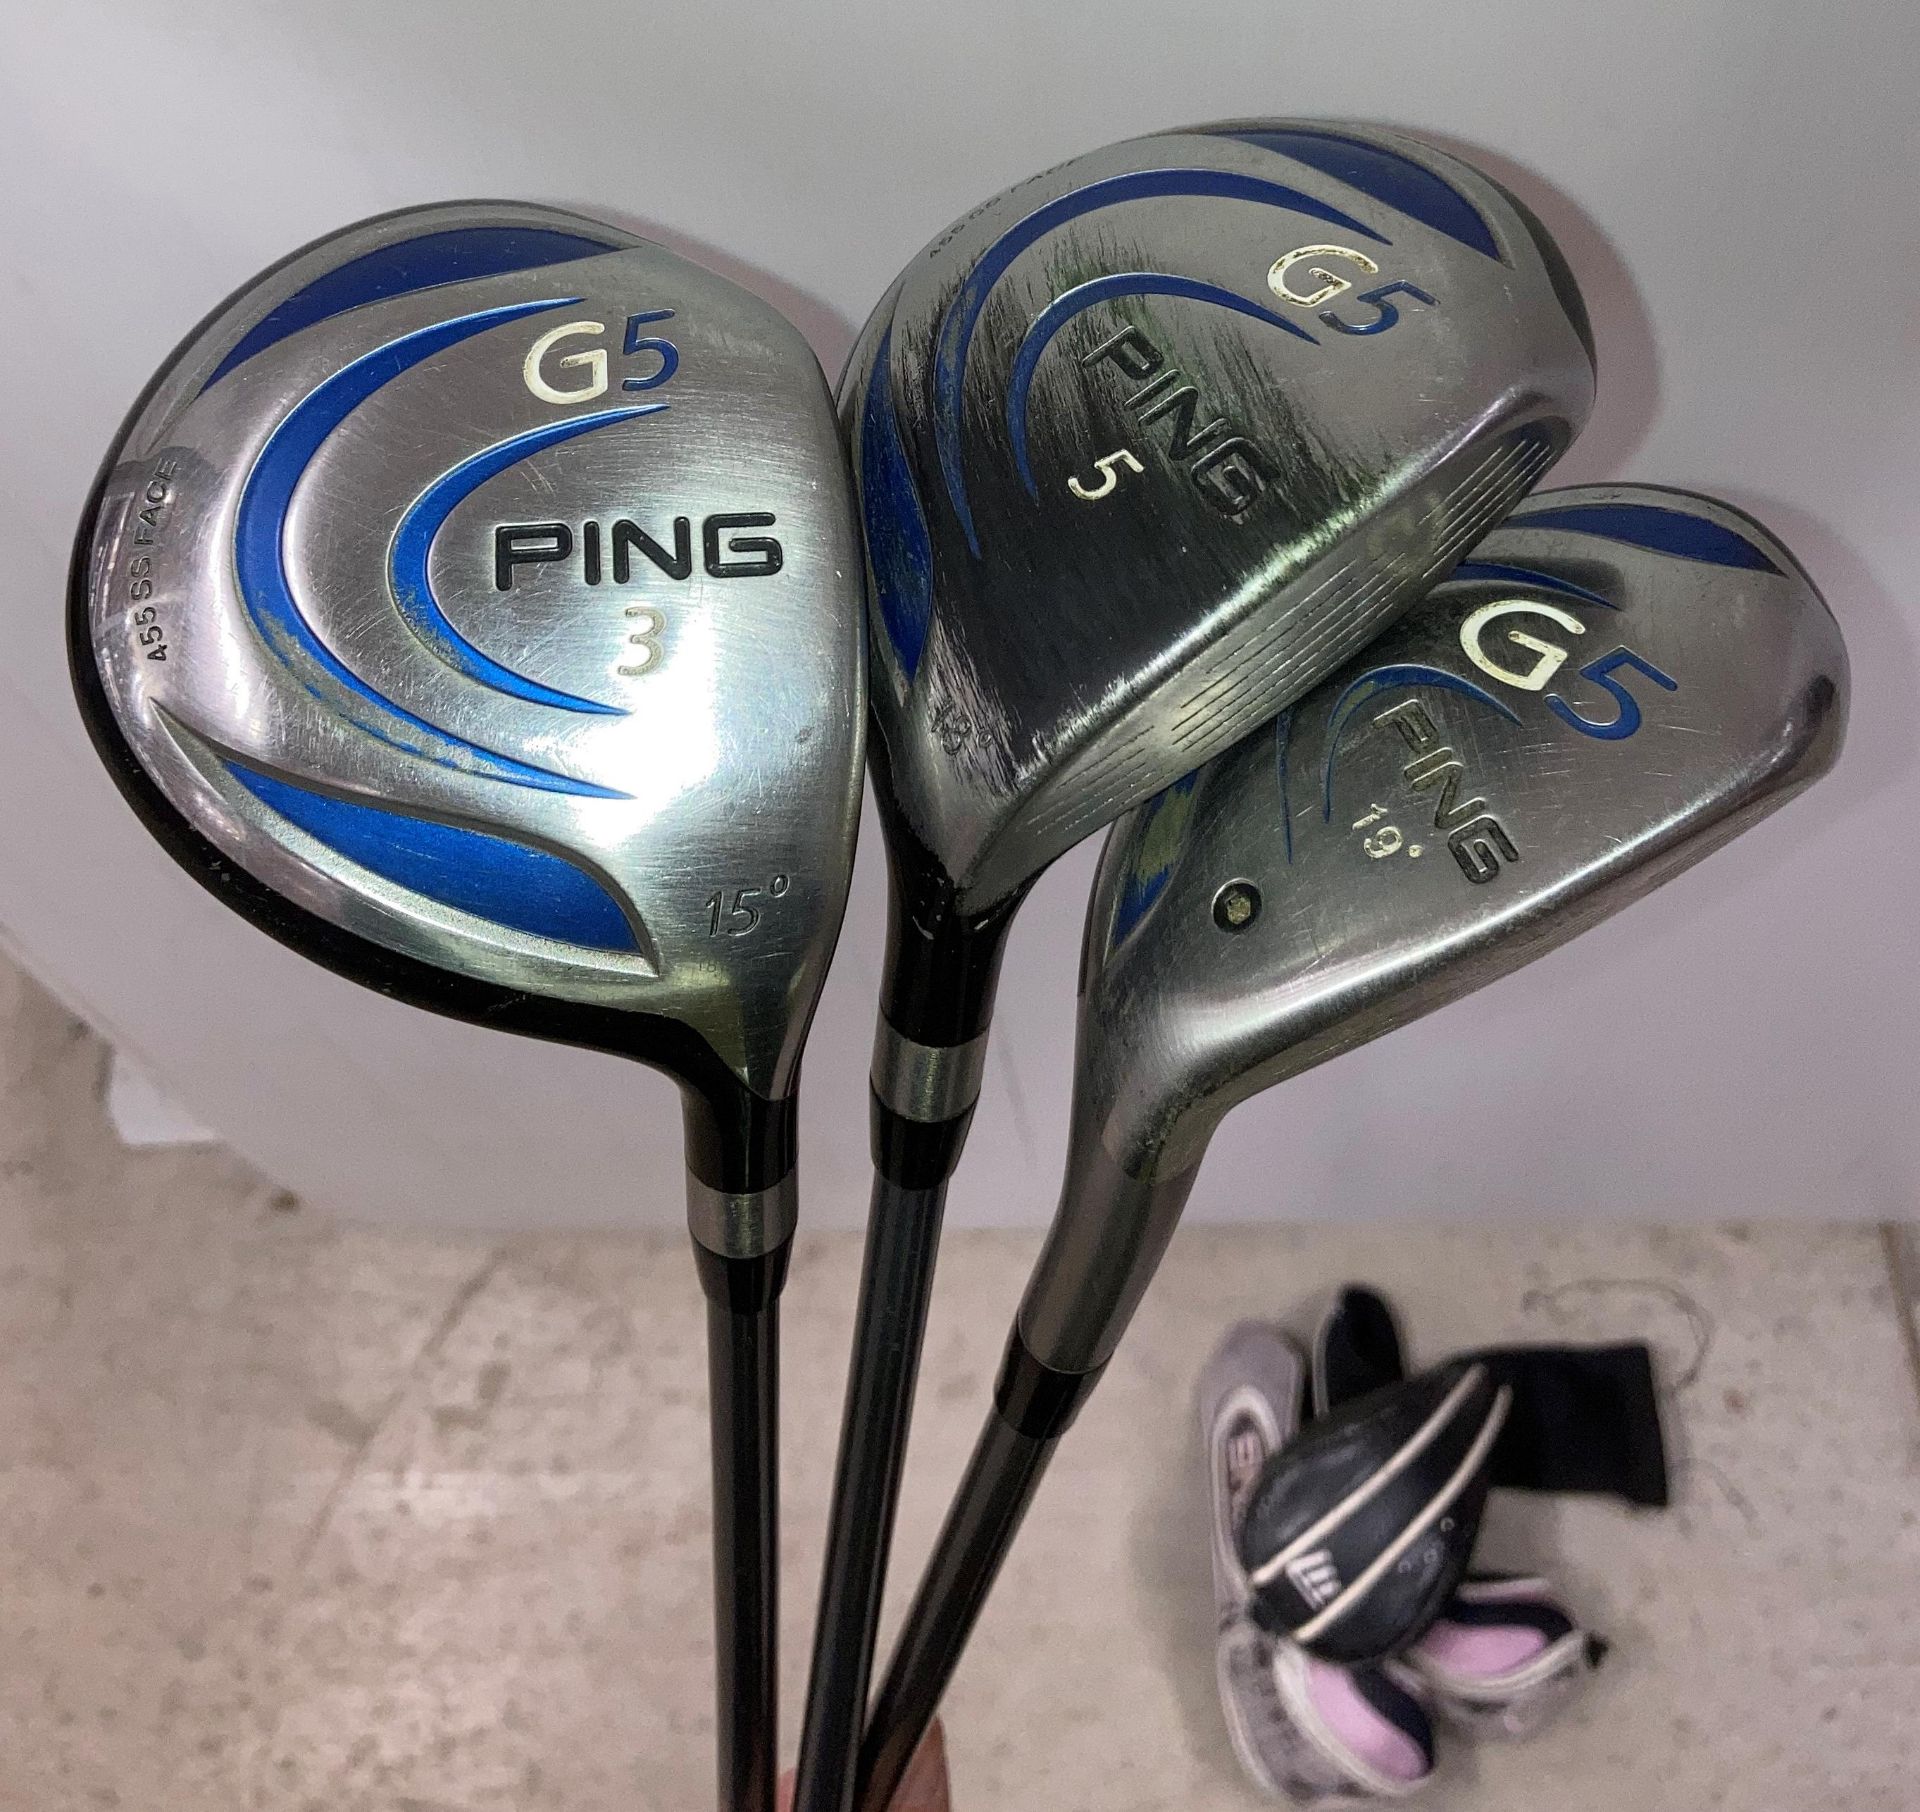 3 golf clubs by Ping - Ping G5, 3 and 5 metals, Ping G5 19 degree rescue club, - Image 2 of 2